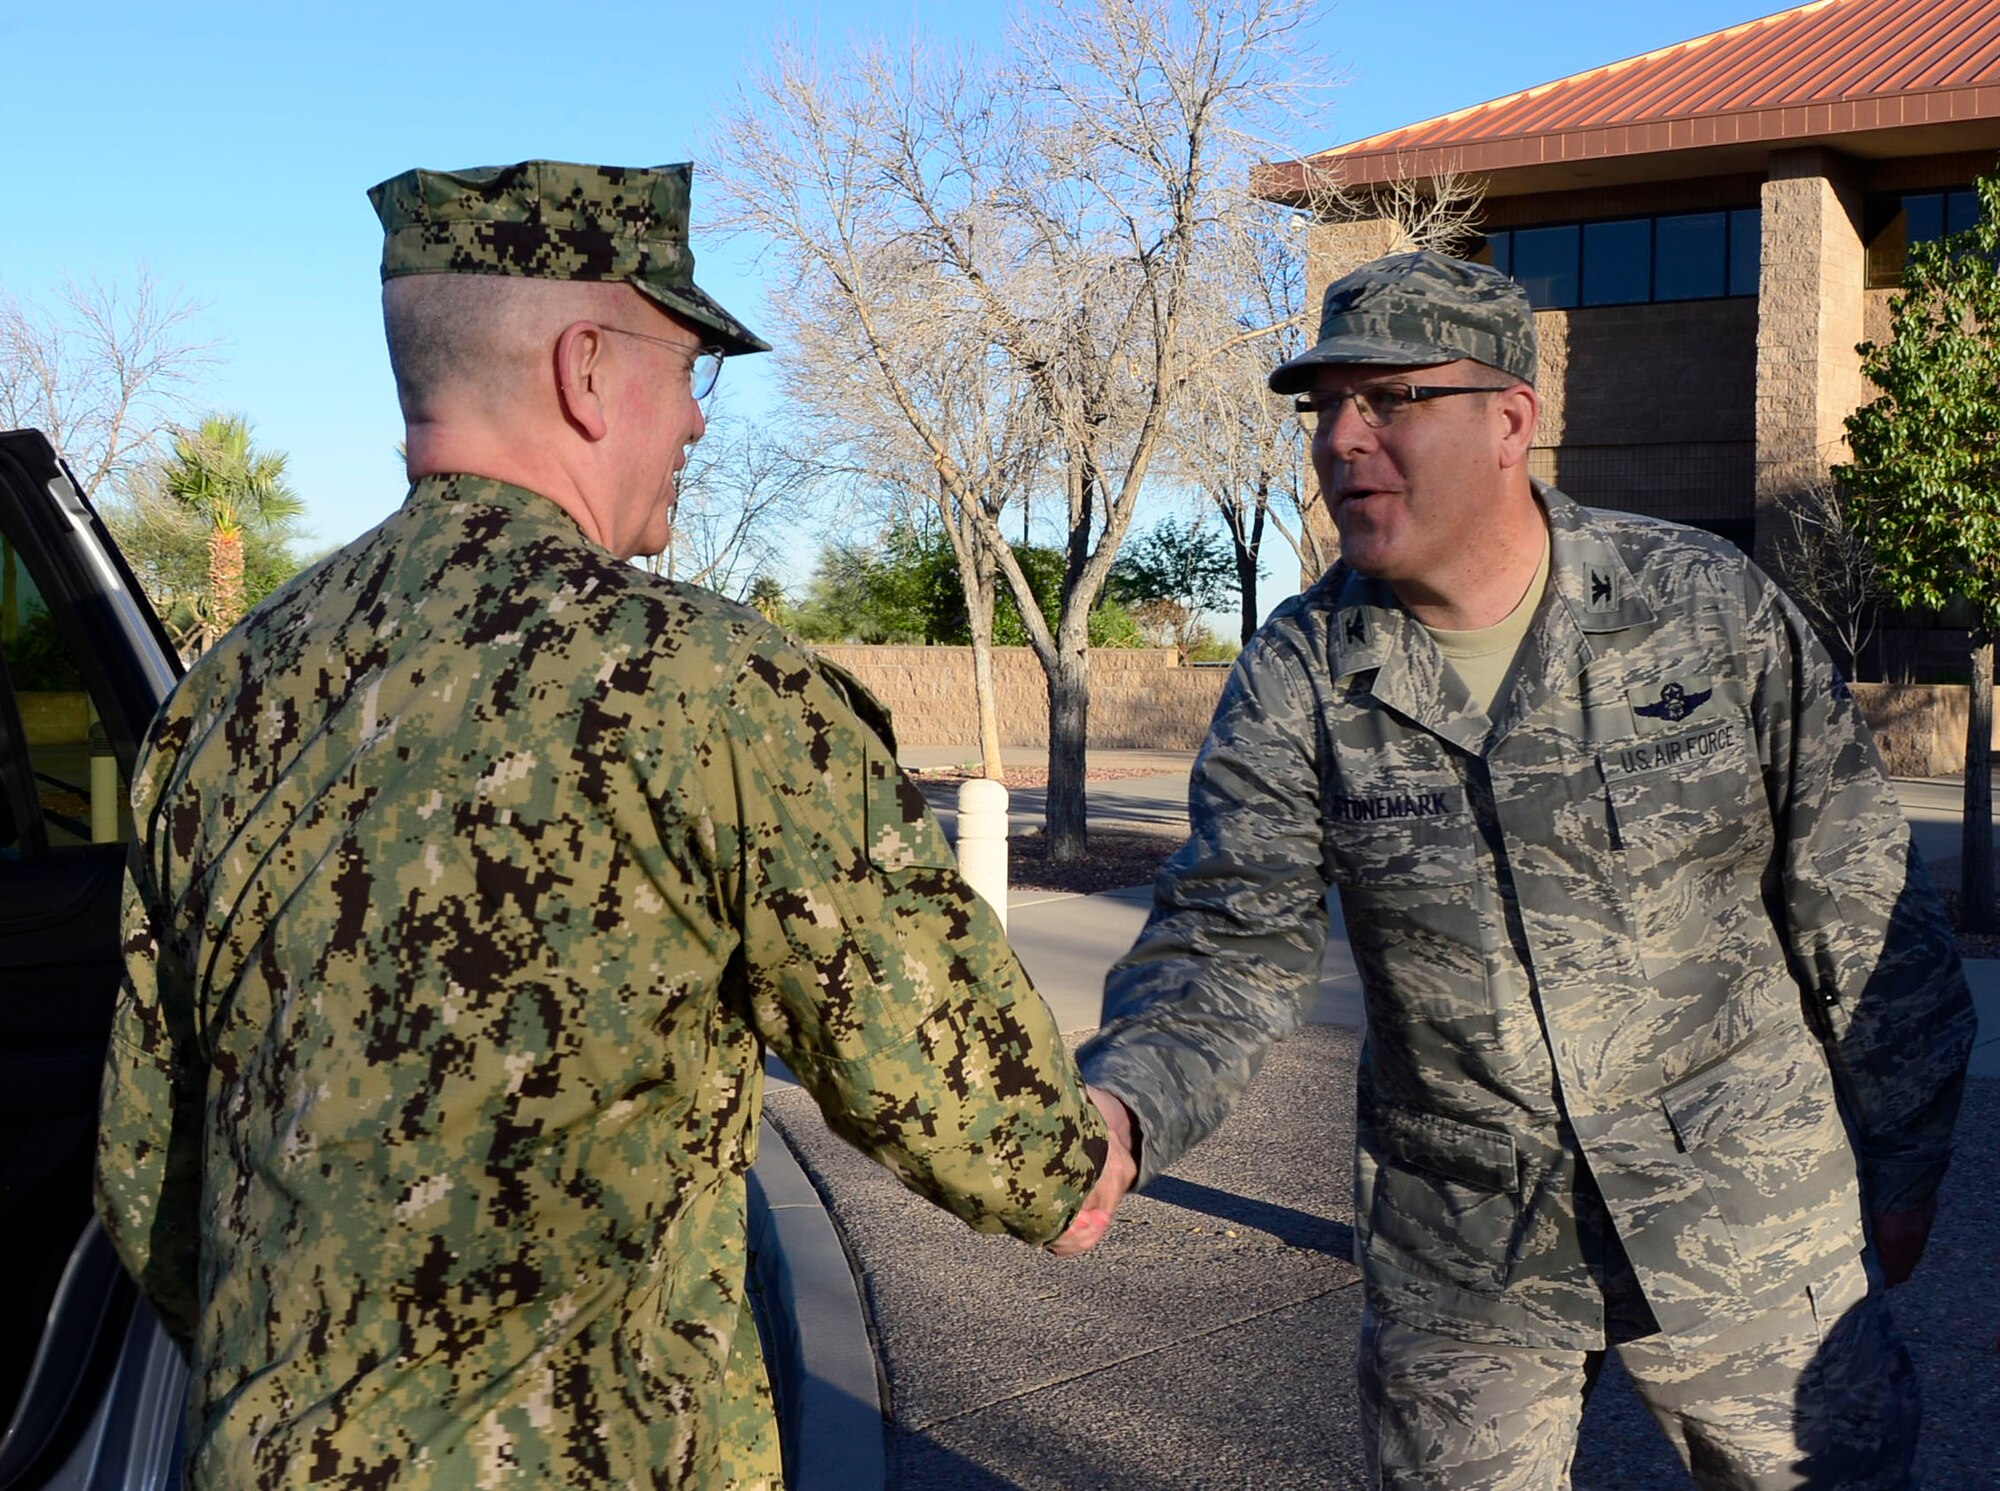 U.S. Navy Adm. Kurt Tidd, U.S. Southern Command commander, is greeted by U.S. Air Force Col. Robert Stonemark, 12th Air Force (Air Forces Southern) chief of staff, during the Tidd’s visit to 12th AF (AFSOUTH) at Davis-Monthan AFB, Ariz., Feb. 23, 2016.  Tidd assumed command of U.S. SOUTHCOM on Jan. 14, 2016 and is familiarizing himself with the various component services that make up a combatant command.  U.S. SOUTHCOM is responsible for all Department of Defense security cooperation in the 45 nations and territories of Central and South America and the Caribbean.  AFSOUTH is the air component to U.S. SOUTHCOM responsible for U.S. air and space operations throughout U.S. SOUTHCOM’s area of responsibility.  (U.S. Air Force photo by Tech. Sgt. Heather R. Redman/Released)